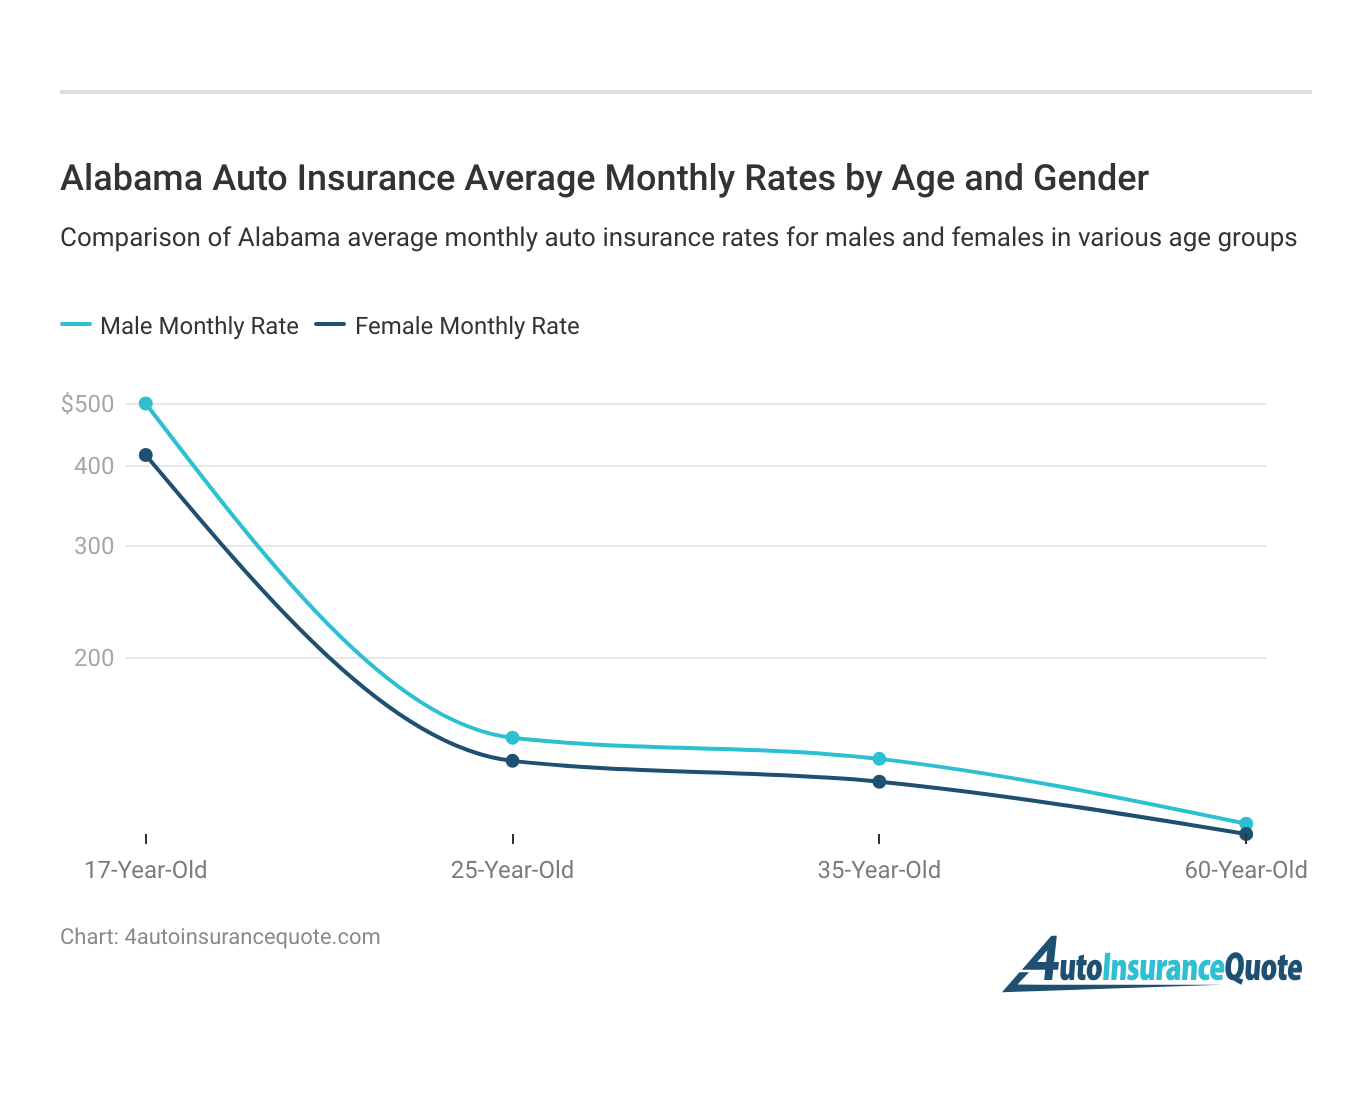 <h3>Alabama Auto Insurance Average Monthly Rates by Age and Gender</h3>